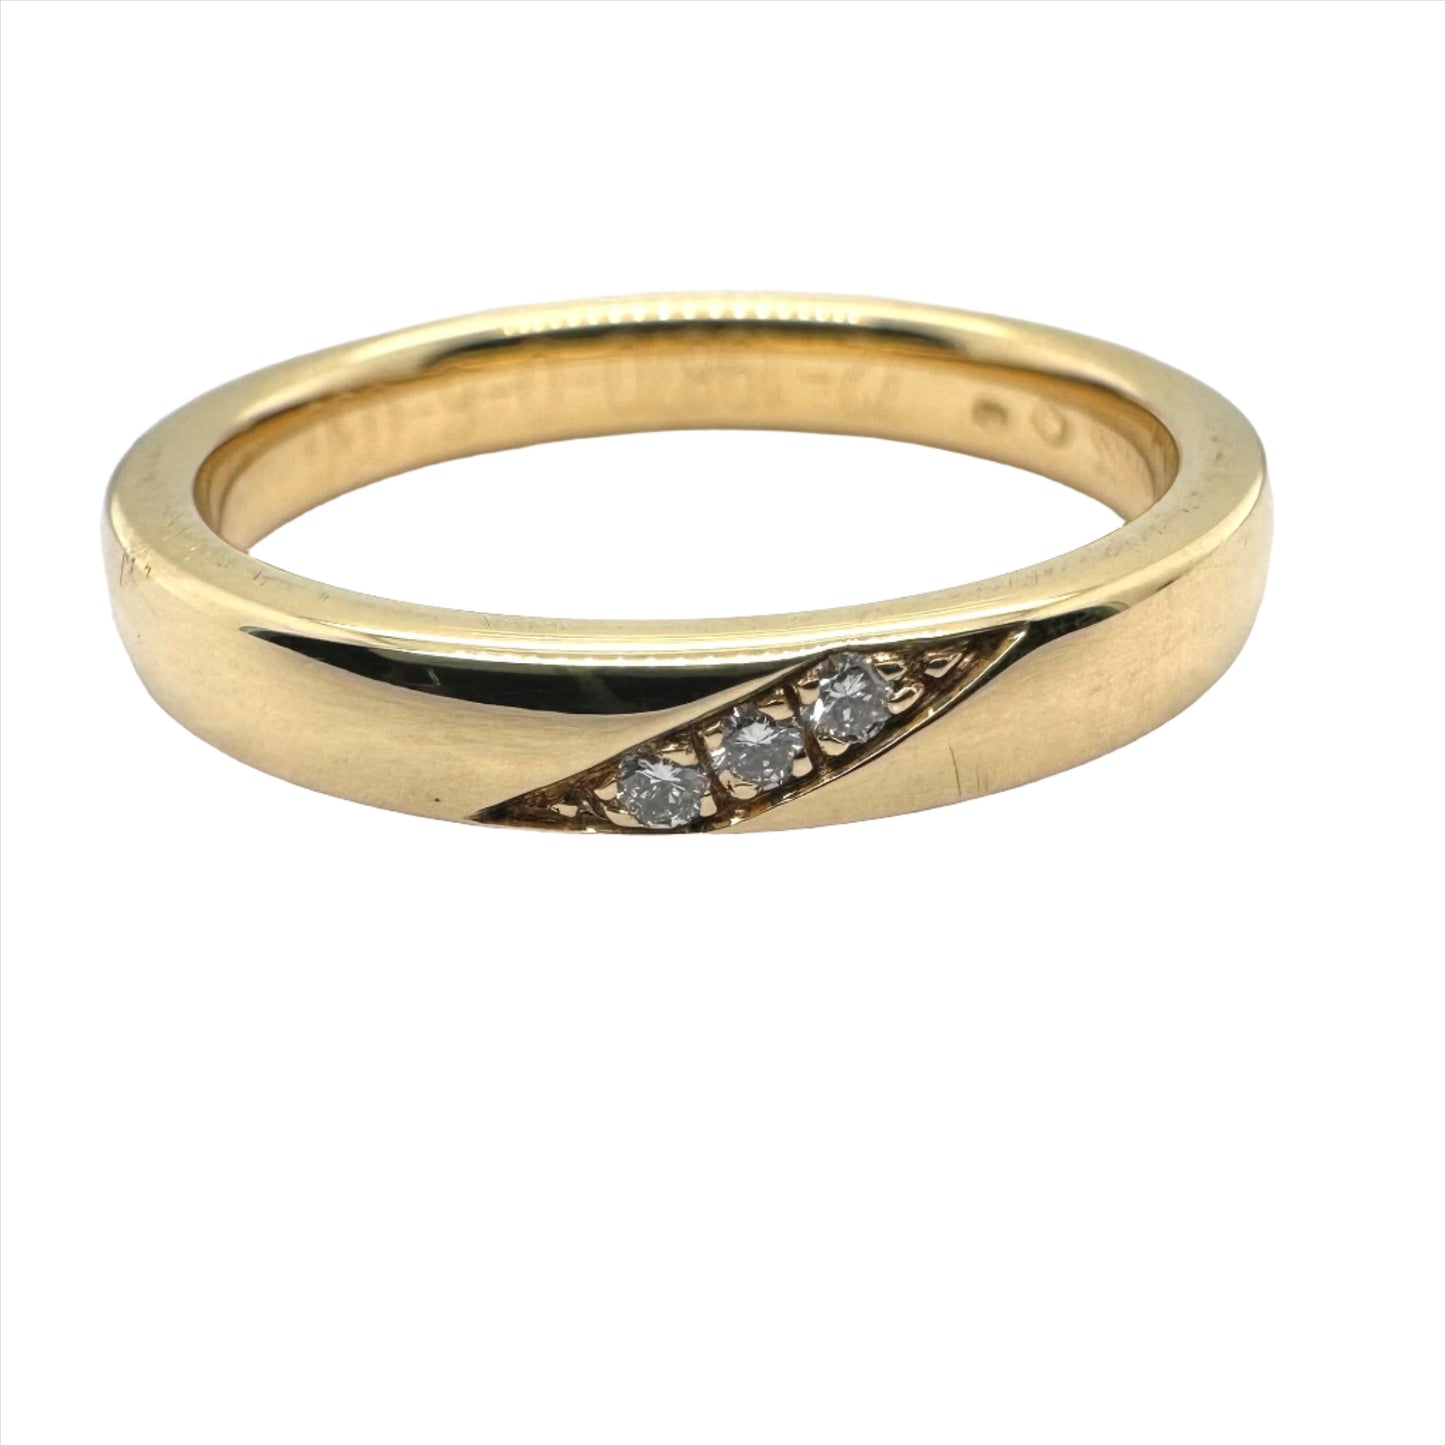 Elegant 18ct Gold Wedding Ring with Sparkling 0.03ct Diamond Accent